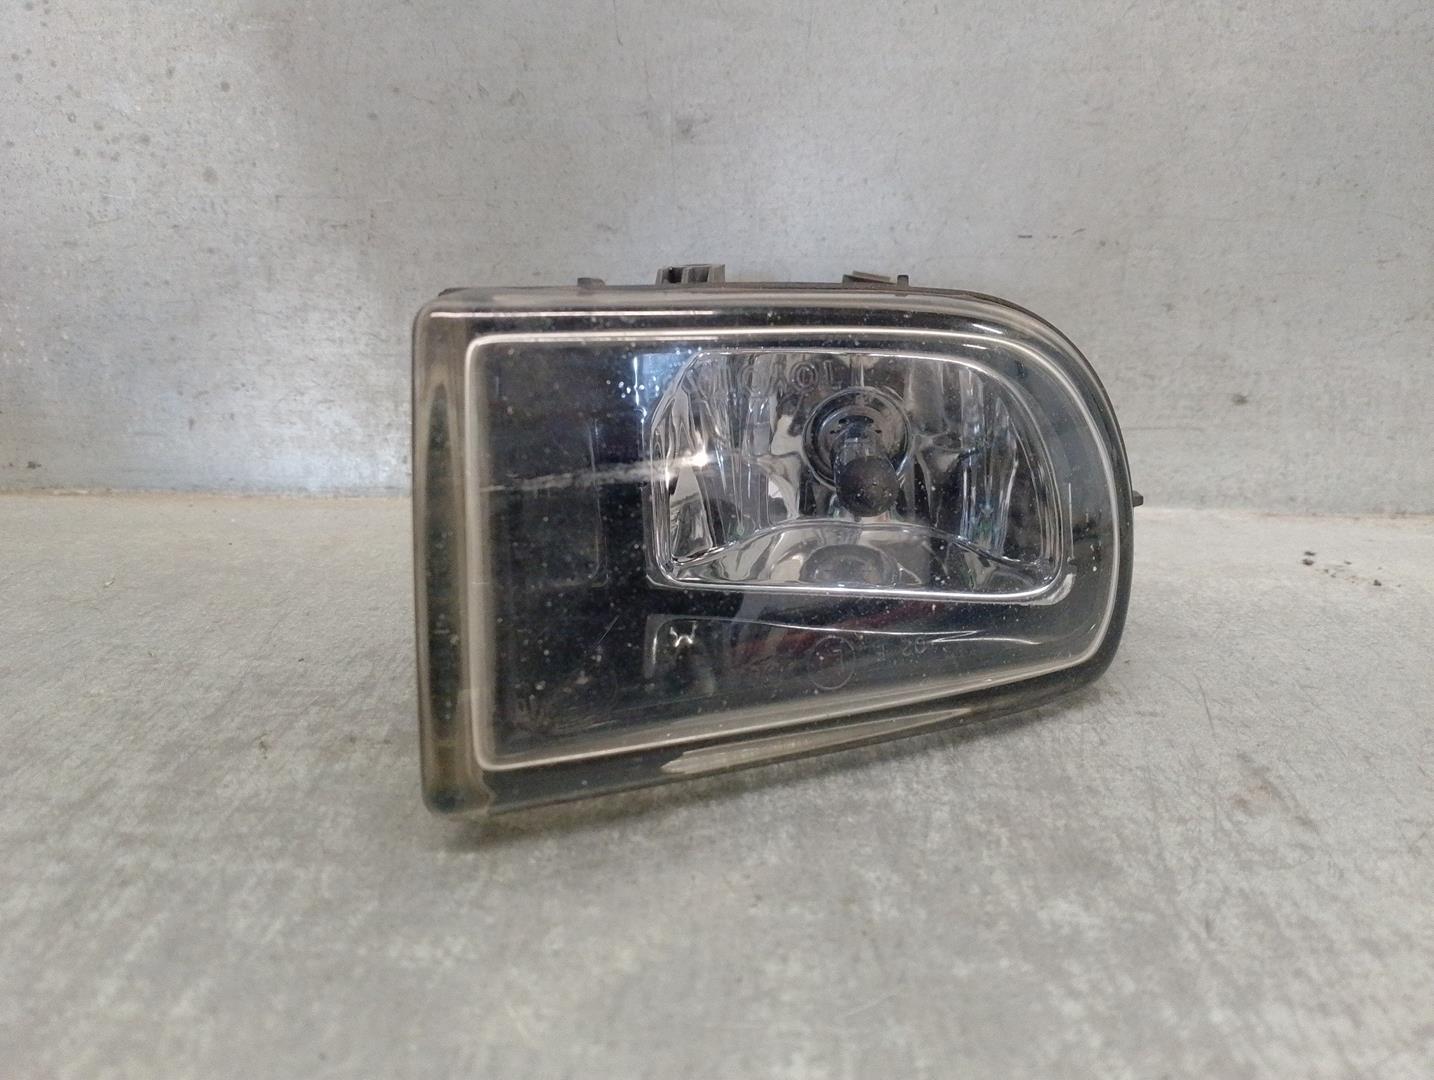 TOYOTA Avensis 1 generation (1997-2003) Front Right Fog Light 8121005050, 1NA23800102, 5PUERTAS 24214071